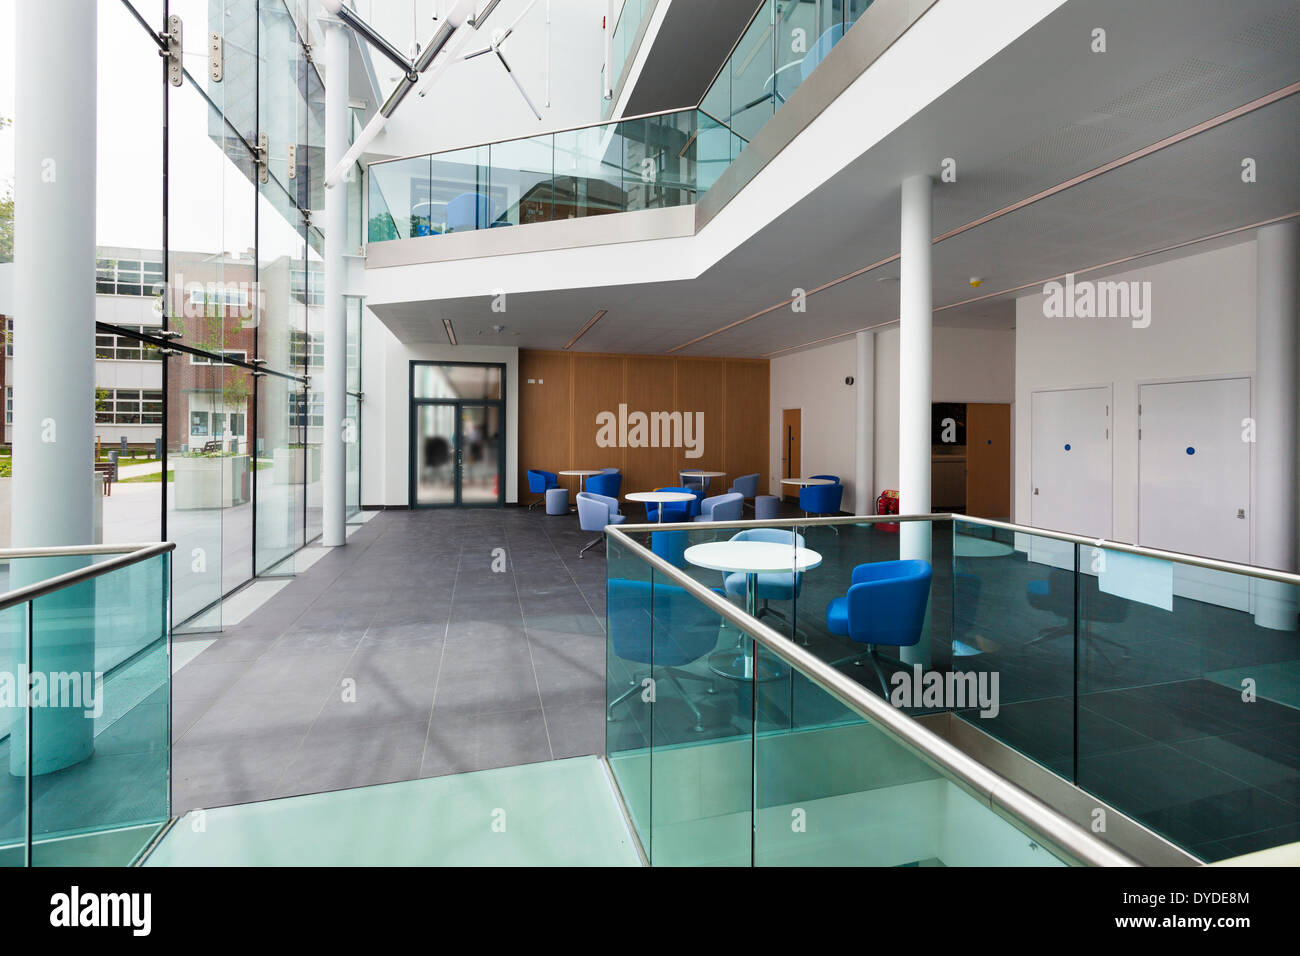 Glass walled extension hallway to Notting Hill and Ealing High School. Stock Photo